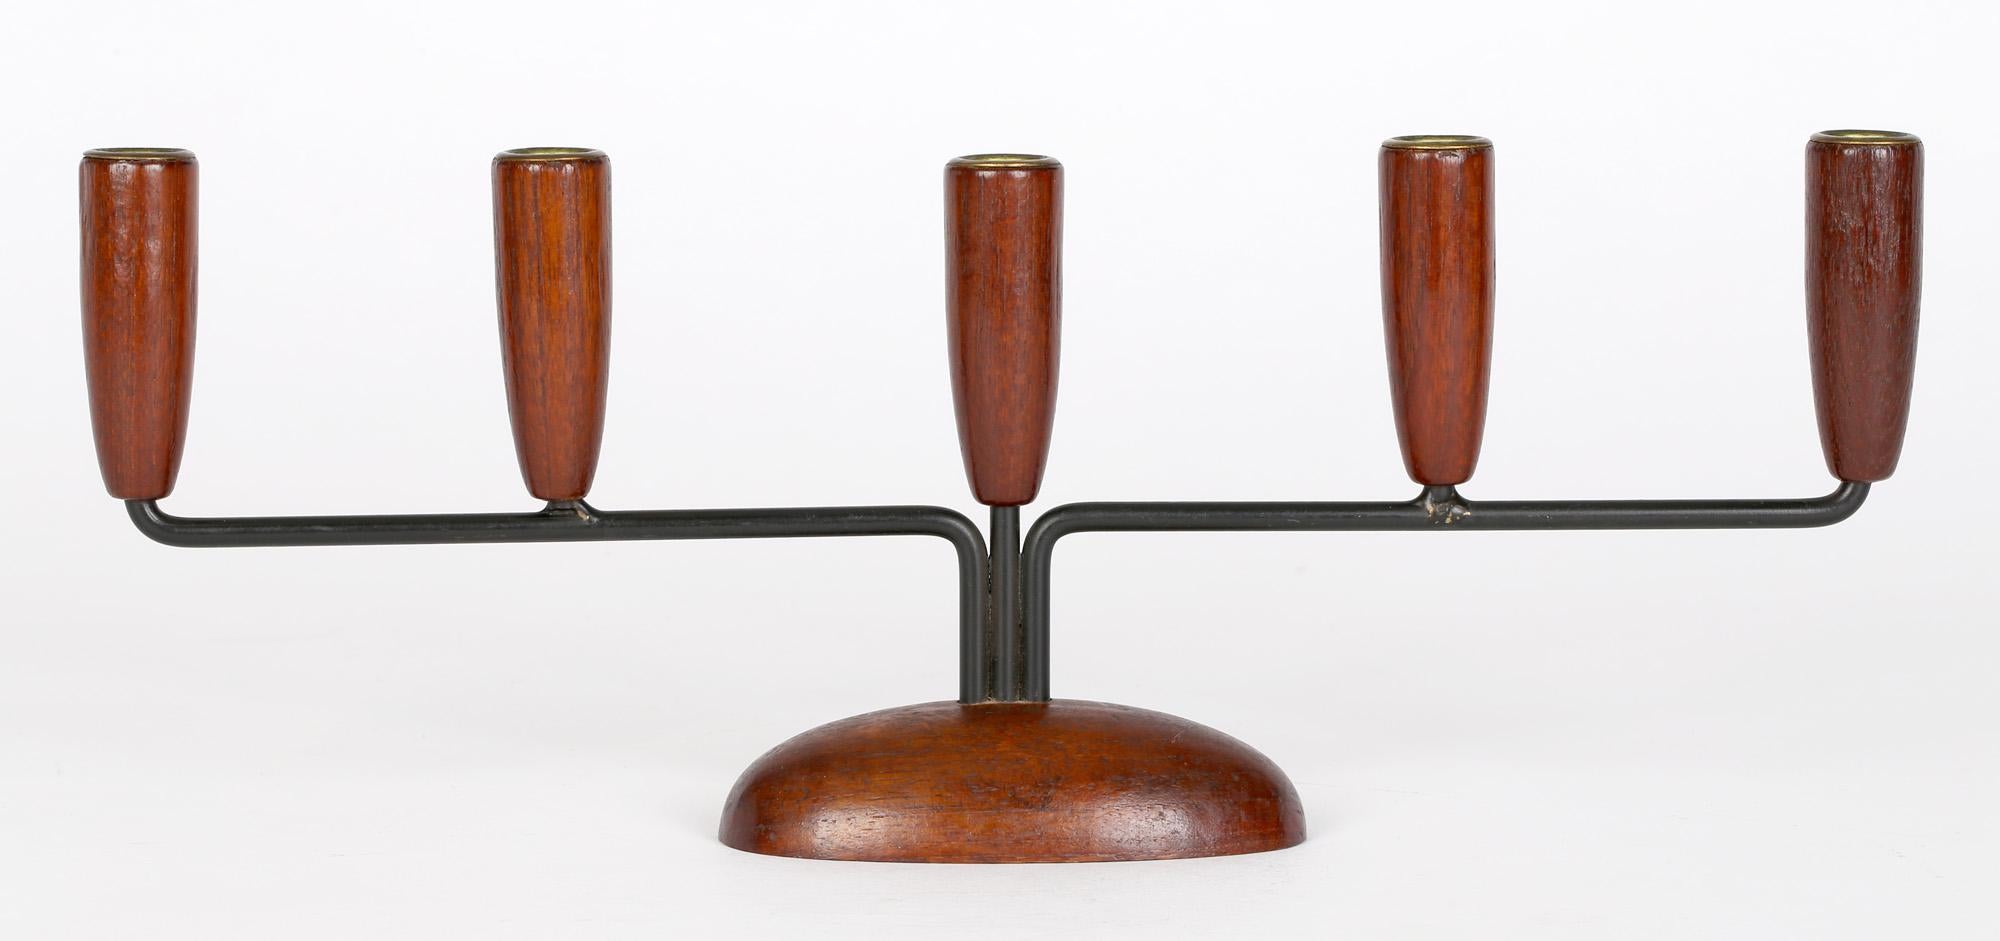 A simple but stunning Danish mid-century metal and wood five sconce candle stick dating from around 1960. The candlestick stands mounted on a carved raised oval shaped base with three metal arms extending from the centre. The central arm supports